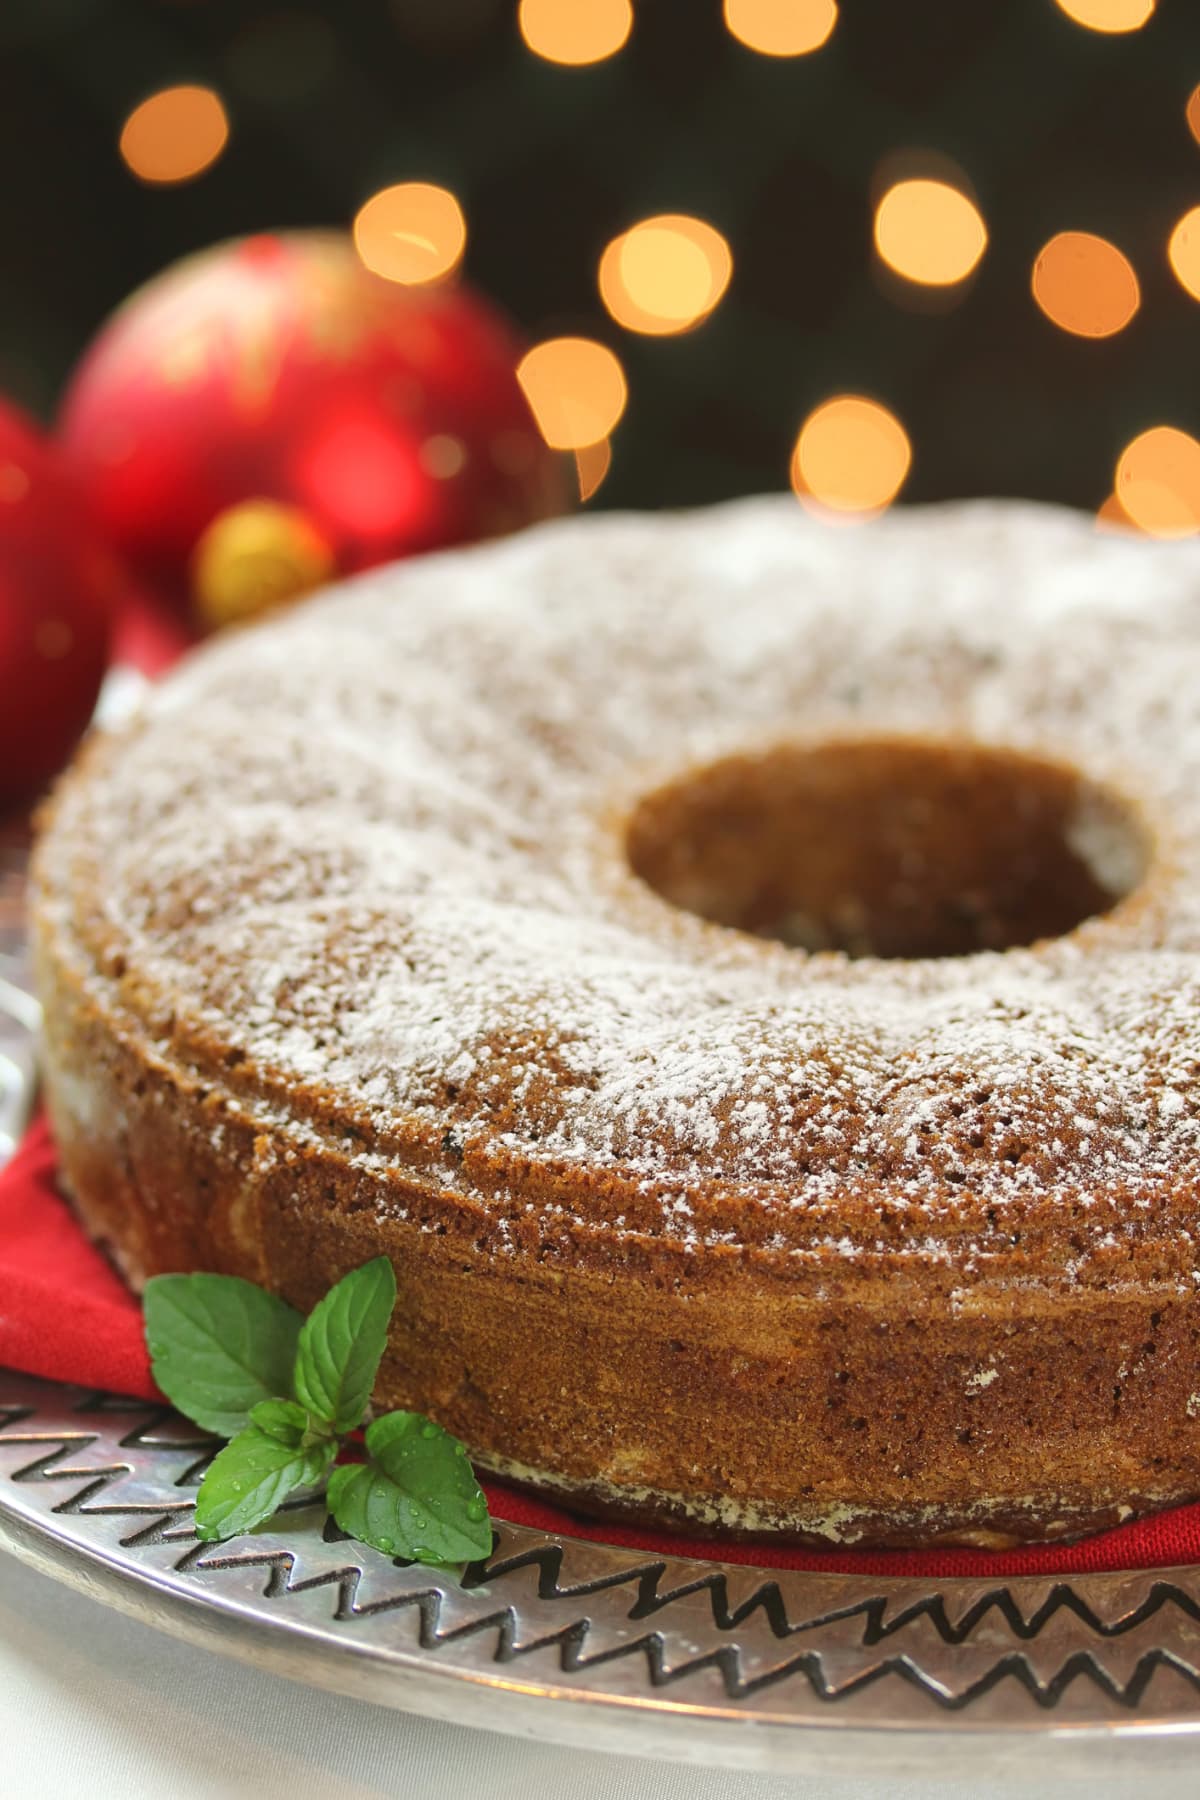 Vertical image of a dessert spice cake at Christmas time in a holiday setting with lights and ornaments.